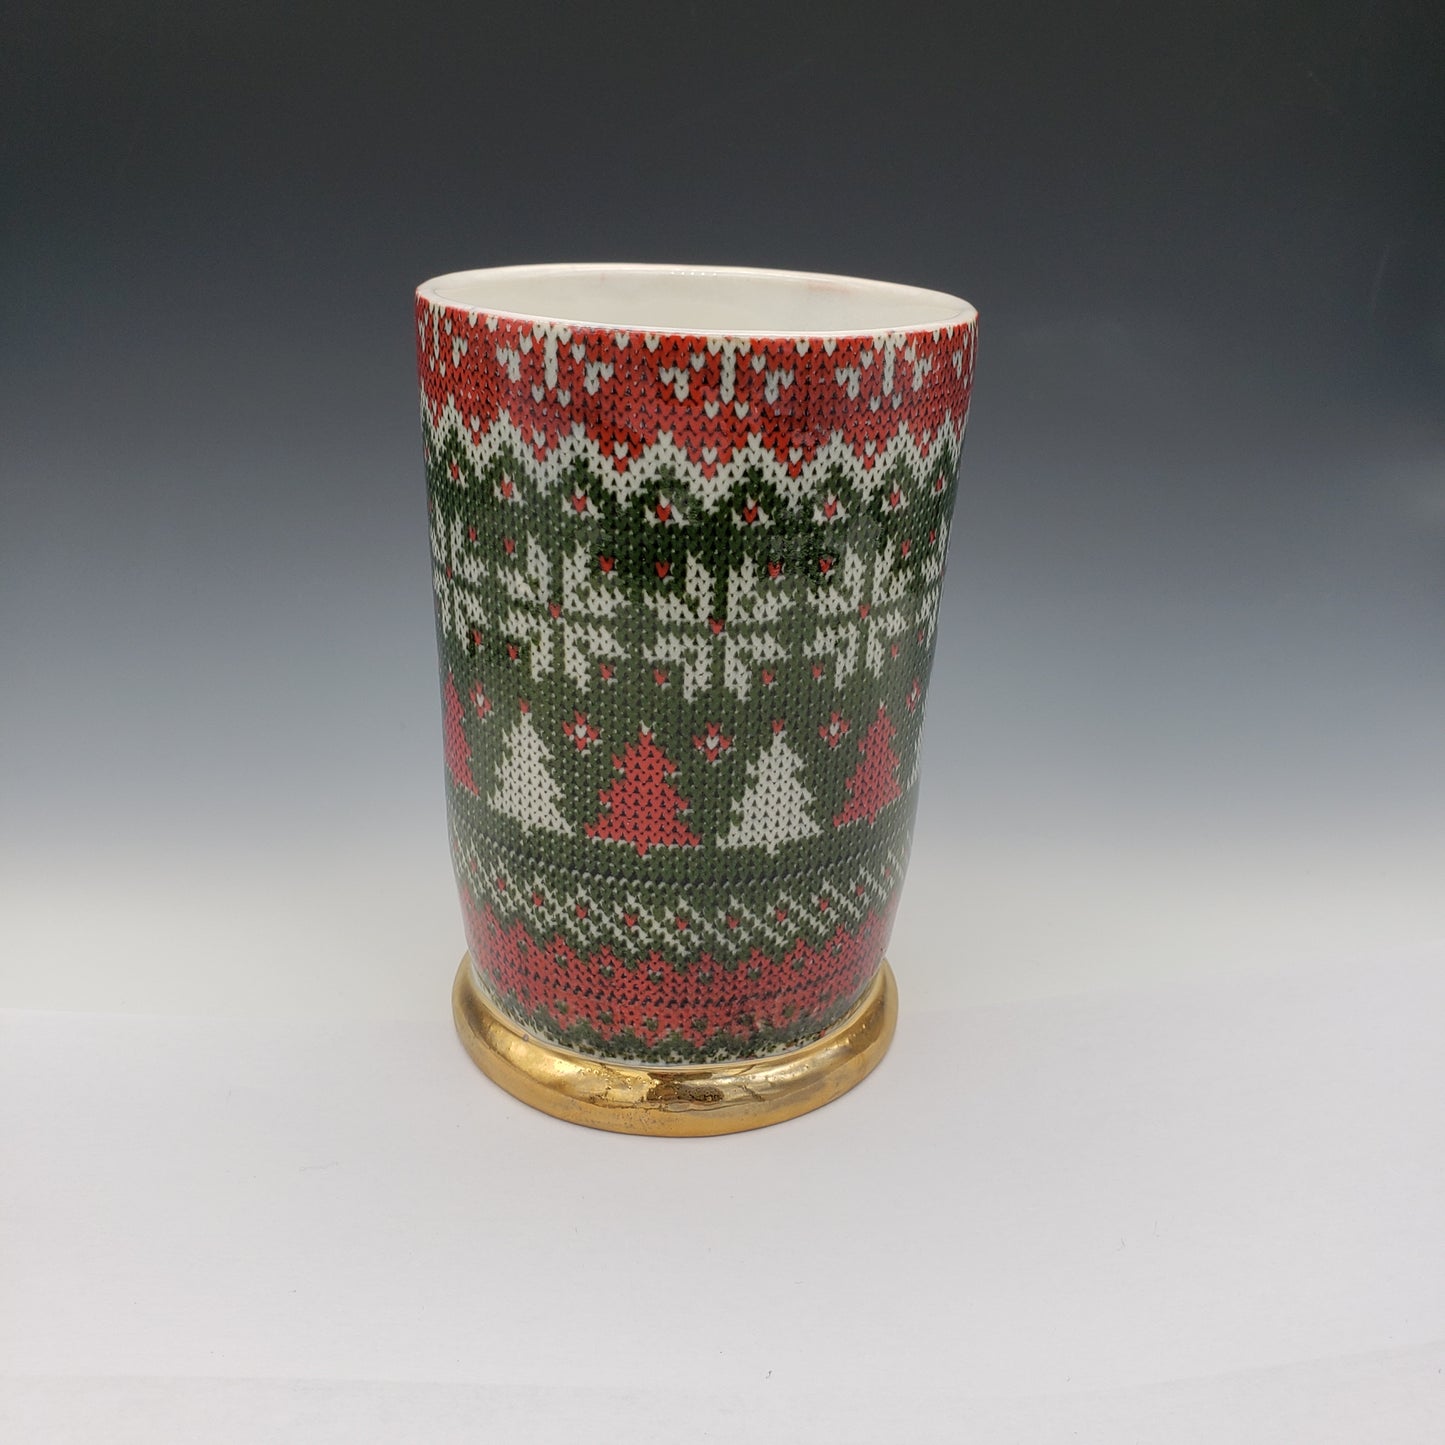 Red and green ugly sweater mug with 22k yellow gold handle and base